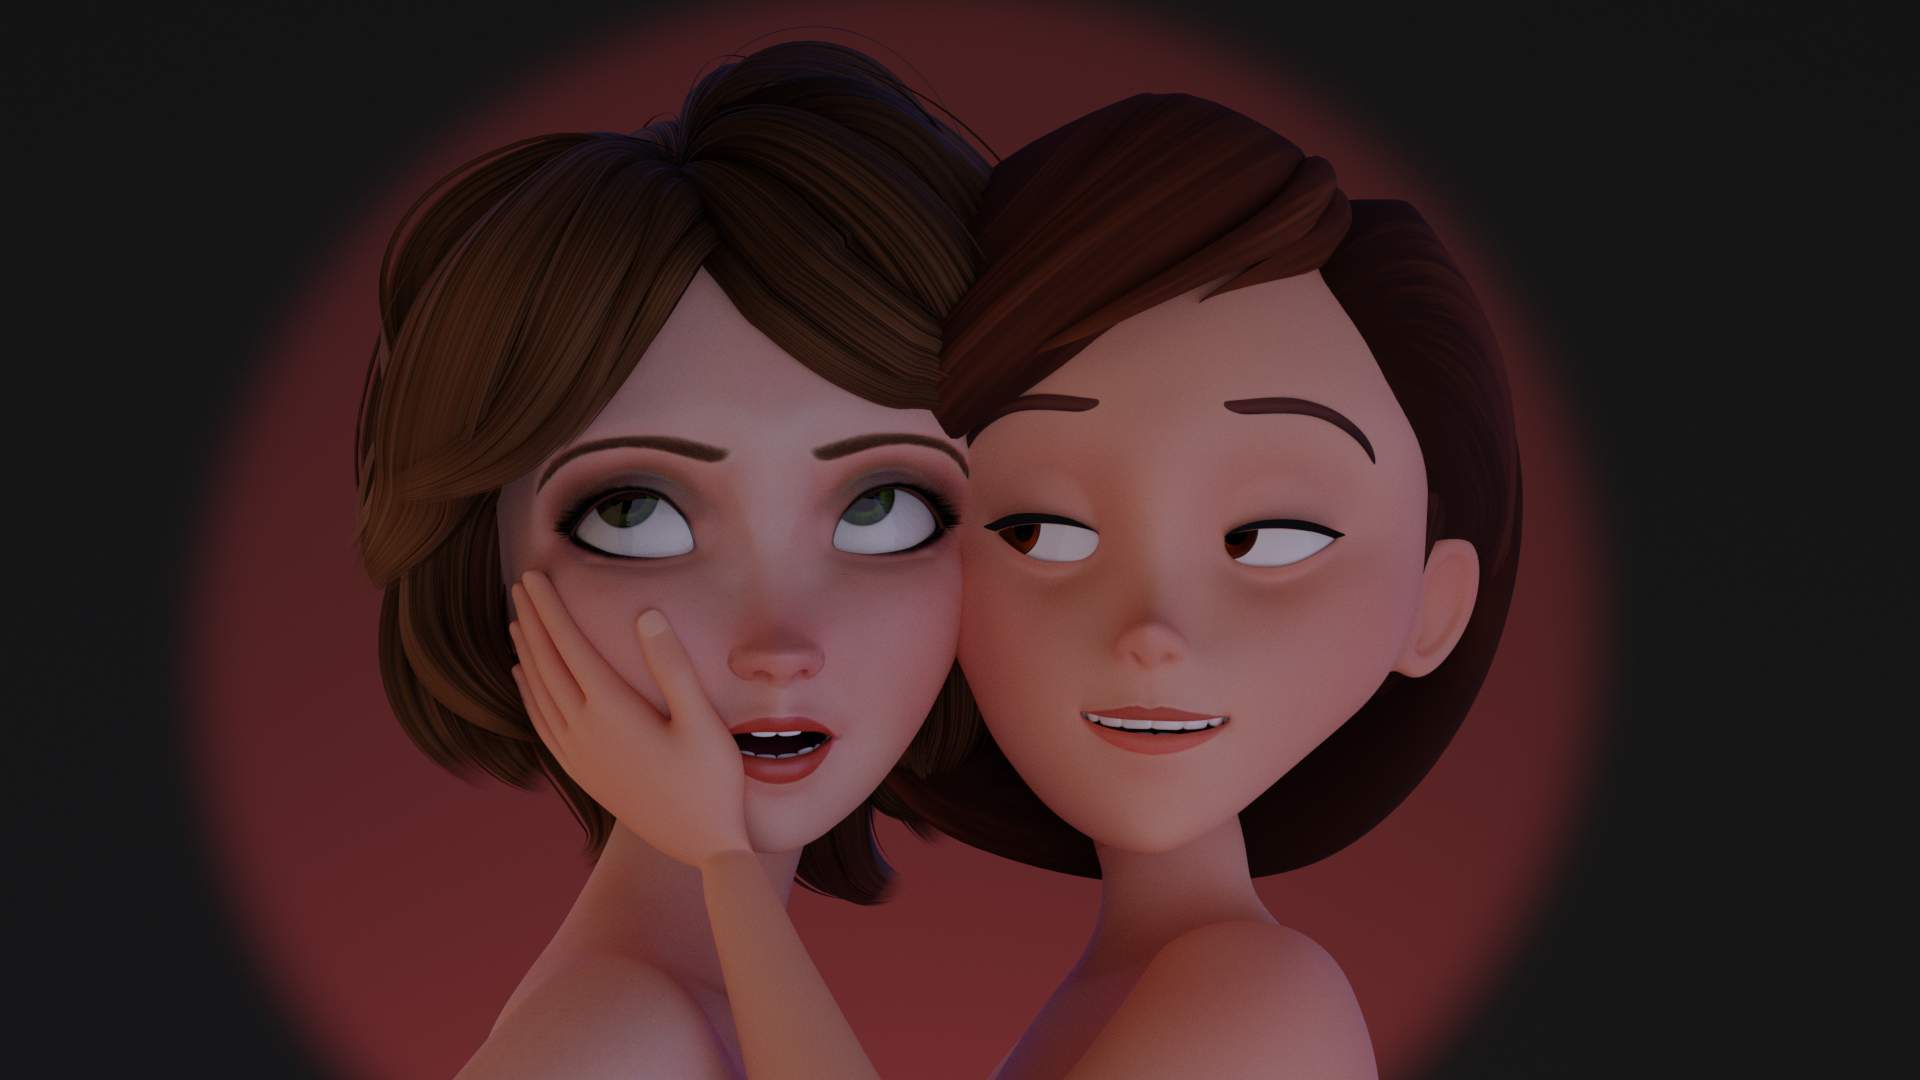 New avatar with Cass and Helen, 1920x1080, 3.1MB, png